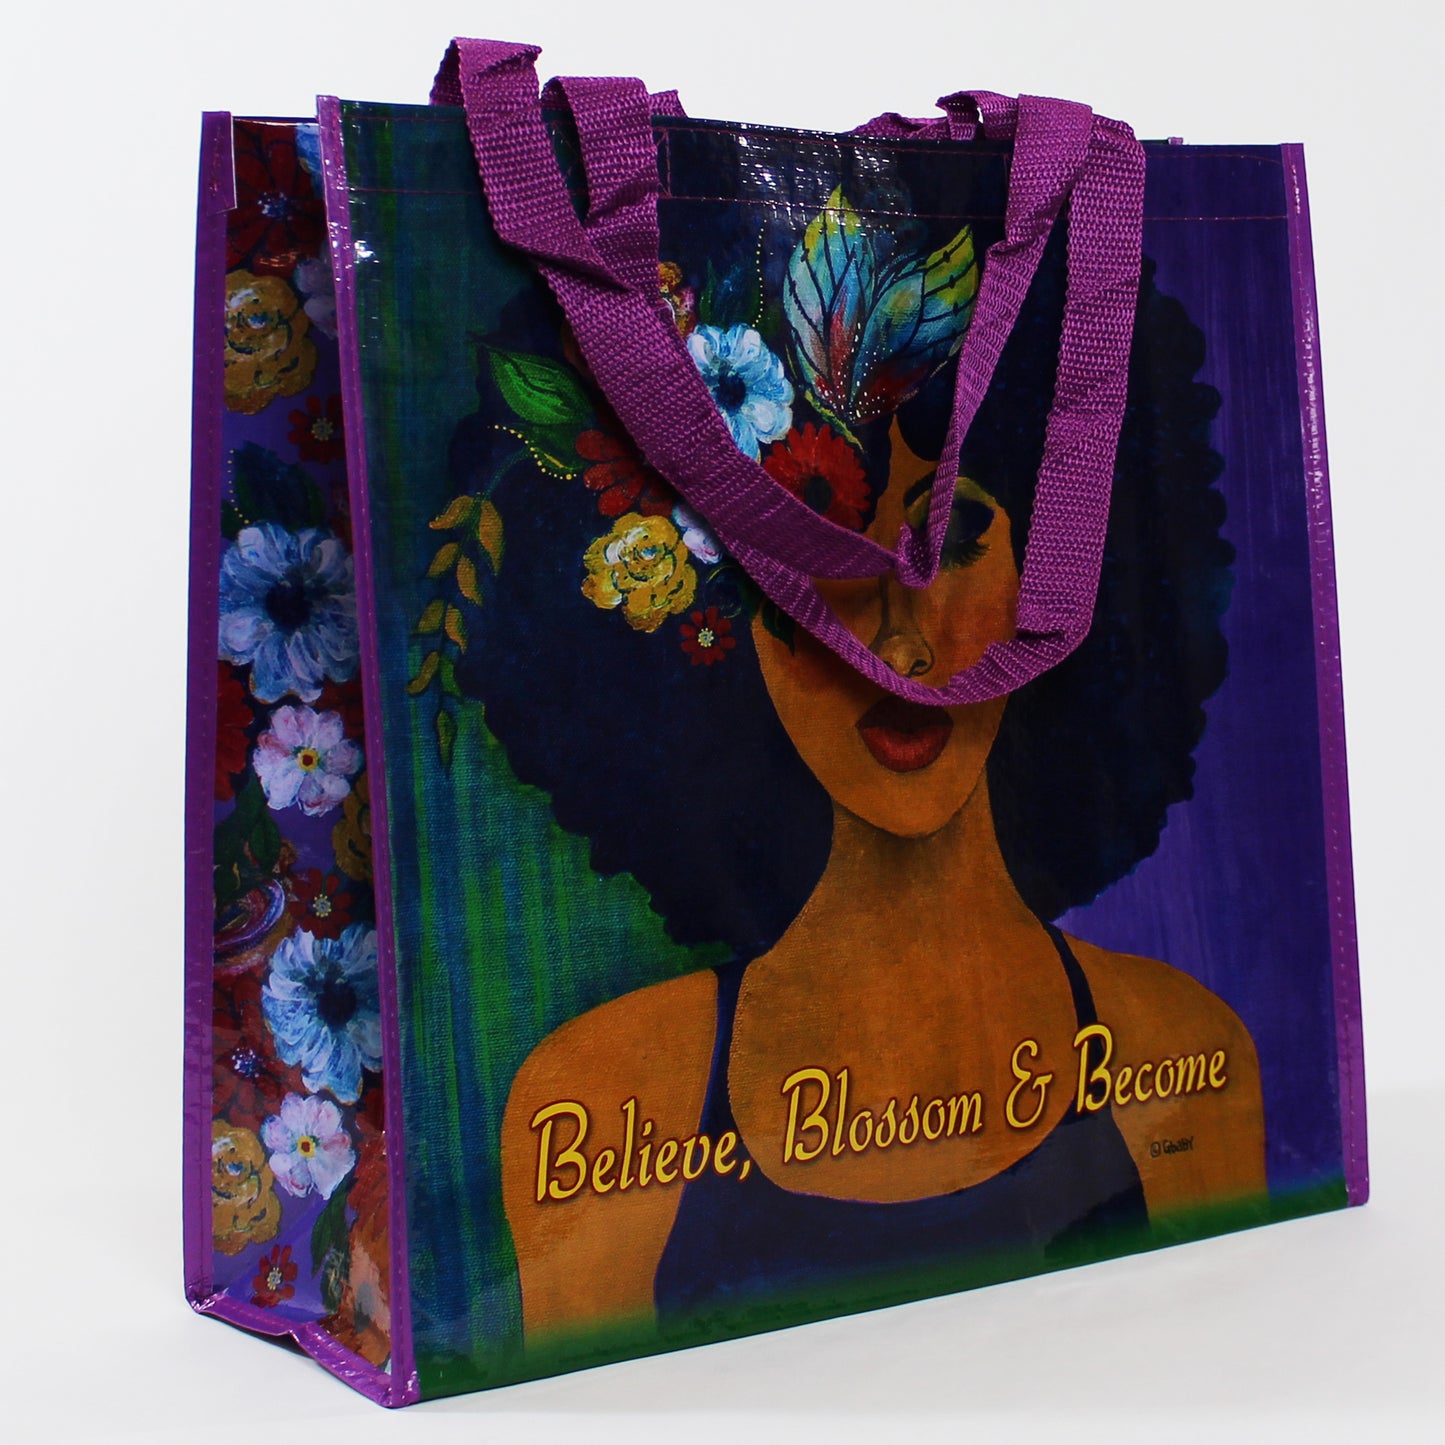 Believe, Blossom & Become Reusable ECO Shopping Tote Bag back